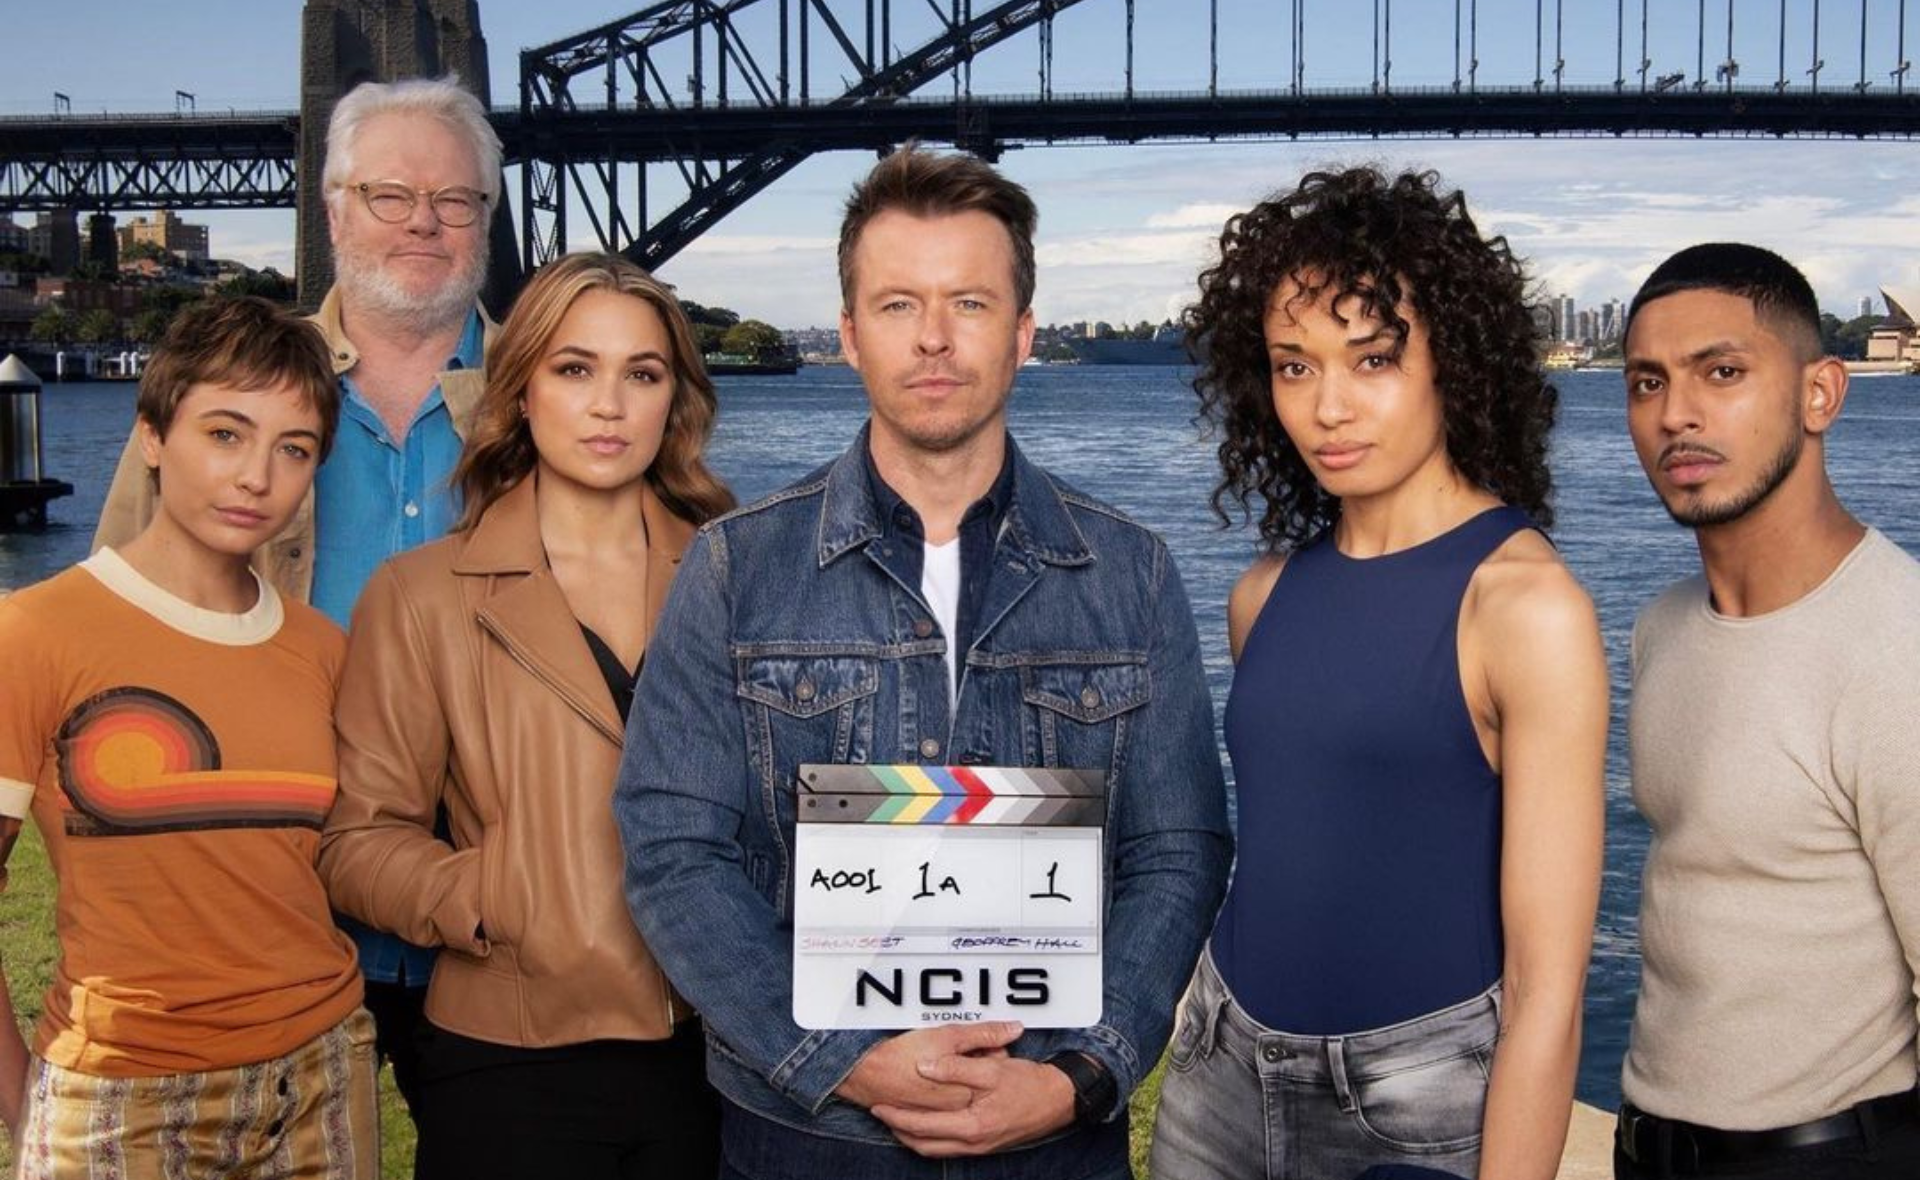 NCIS Sydney: Everything you need to know about the highly anticipated series